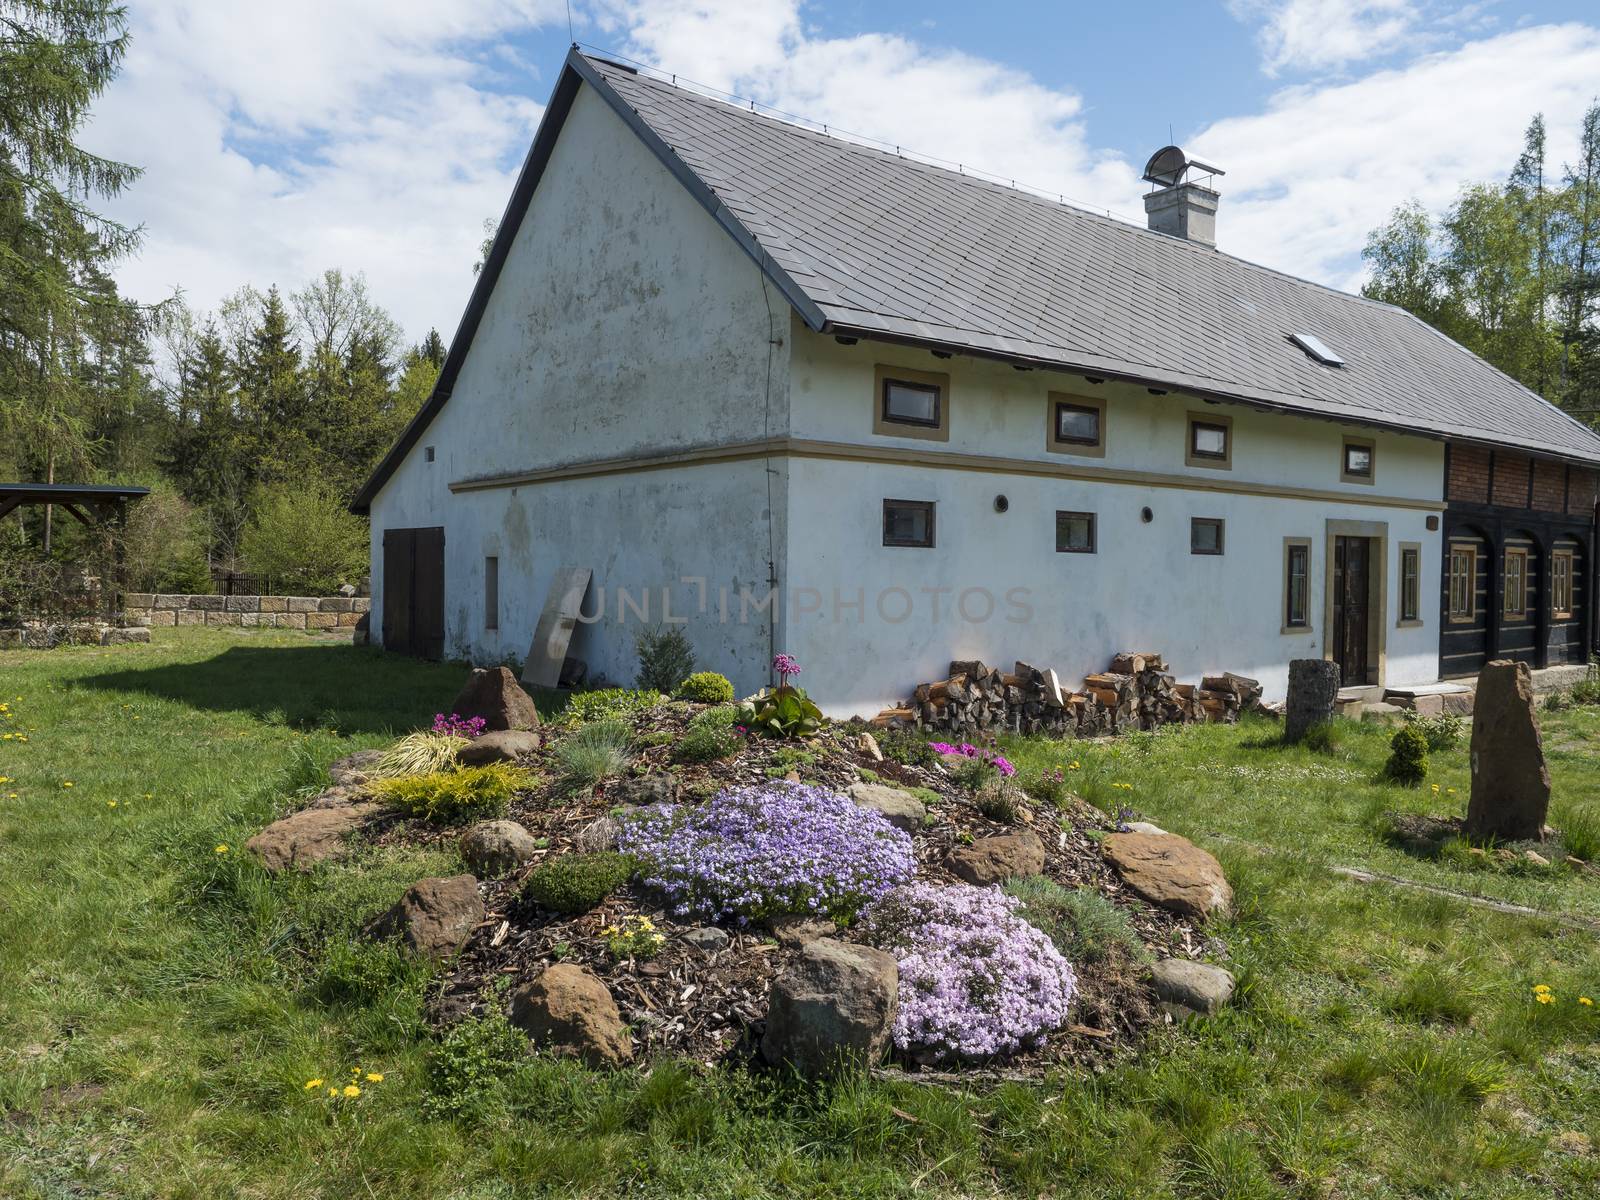 Old half tibered house cootage with garden, rock garden in full bloom with pink Phlox, Armeria maritima, sea thrift, Bergenia or elephants ears, carnation colorful blooming flowers and gazebo pergola by Henkeova